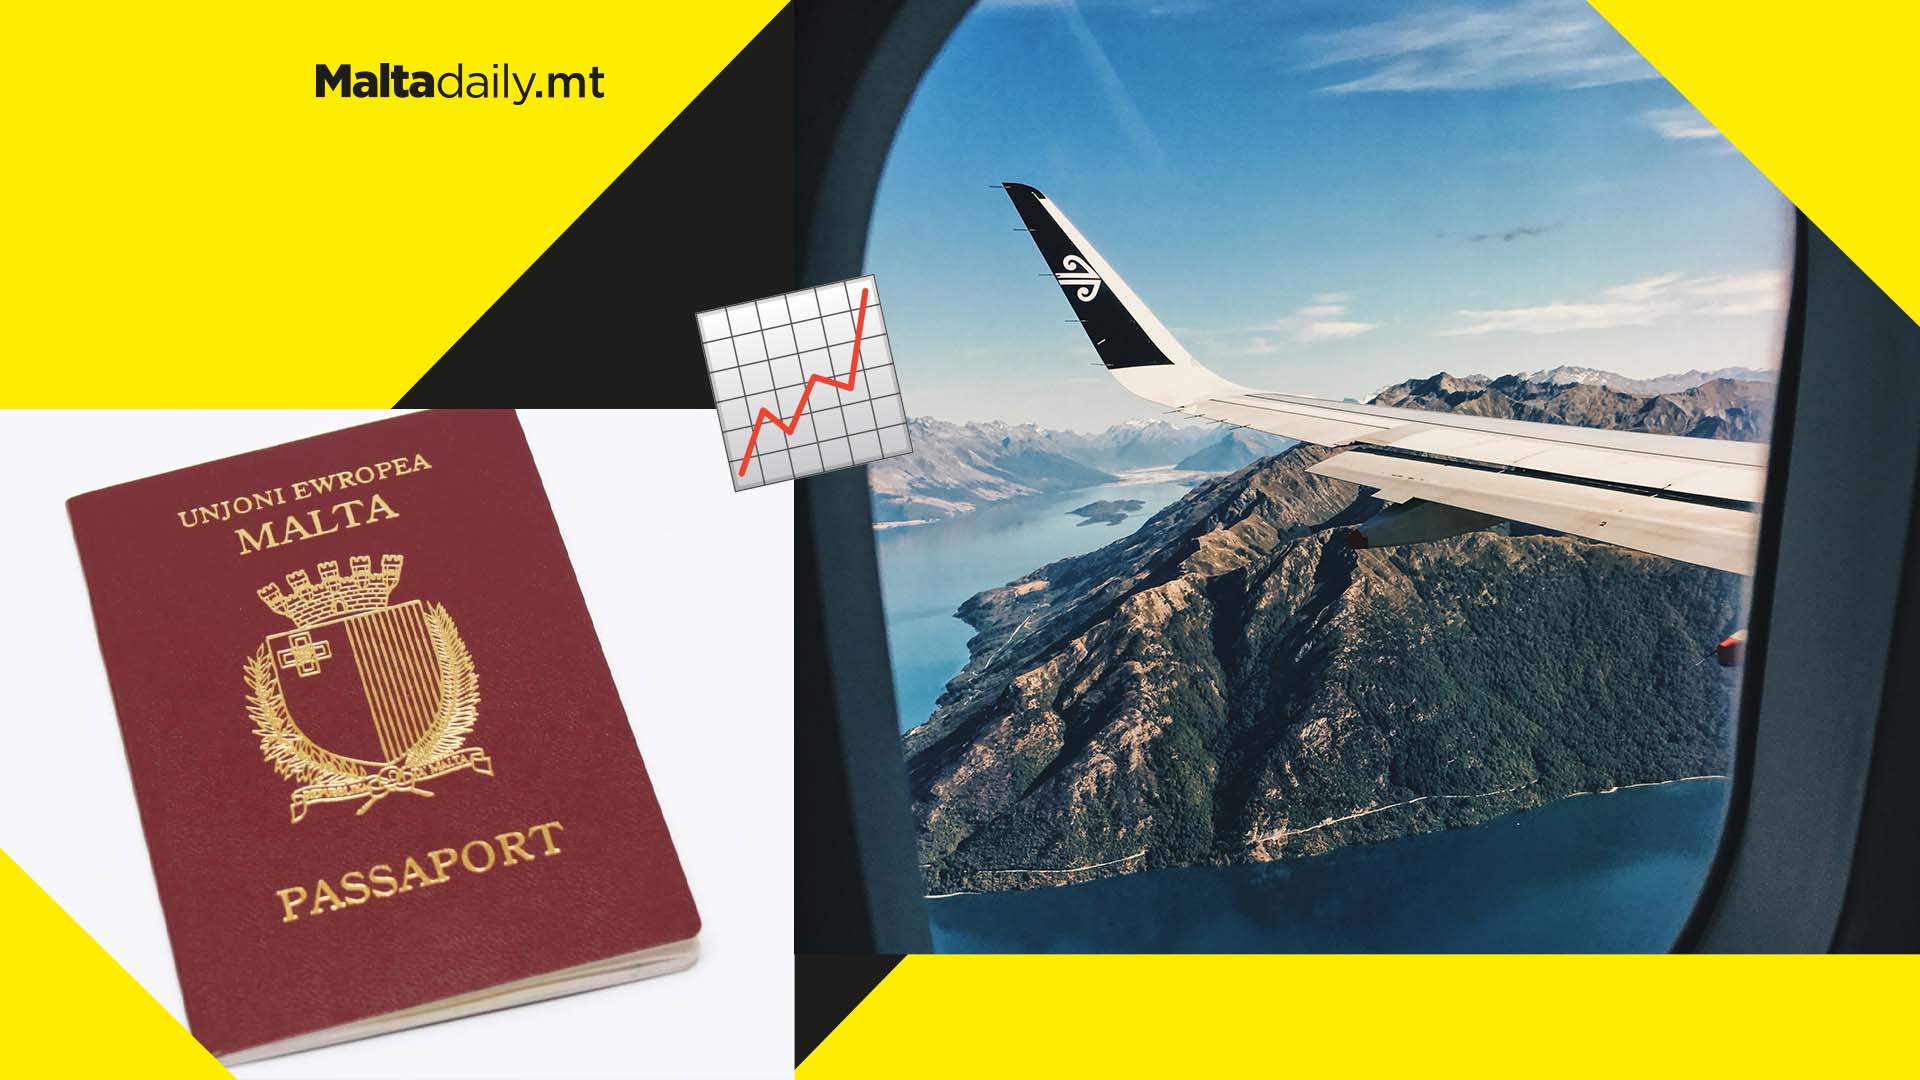 Maltese eager as ever to travel as 36,514 passports issued during first half of 2022